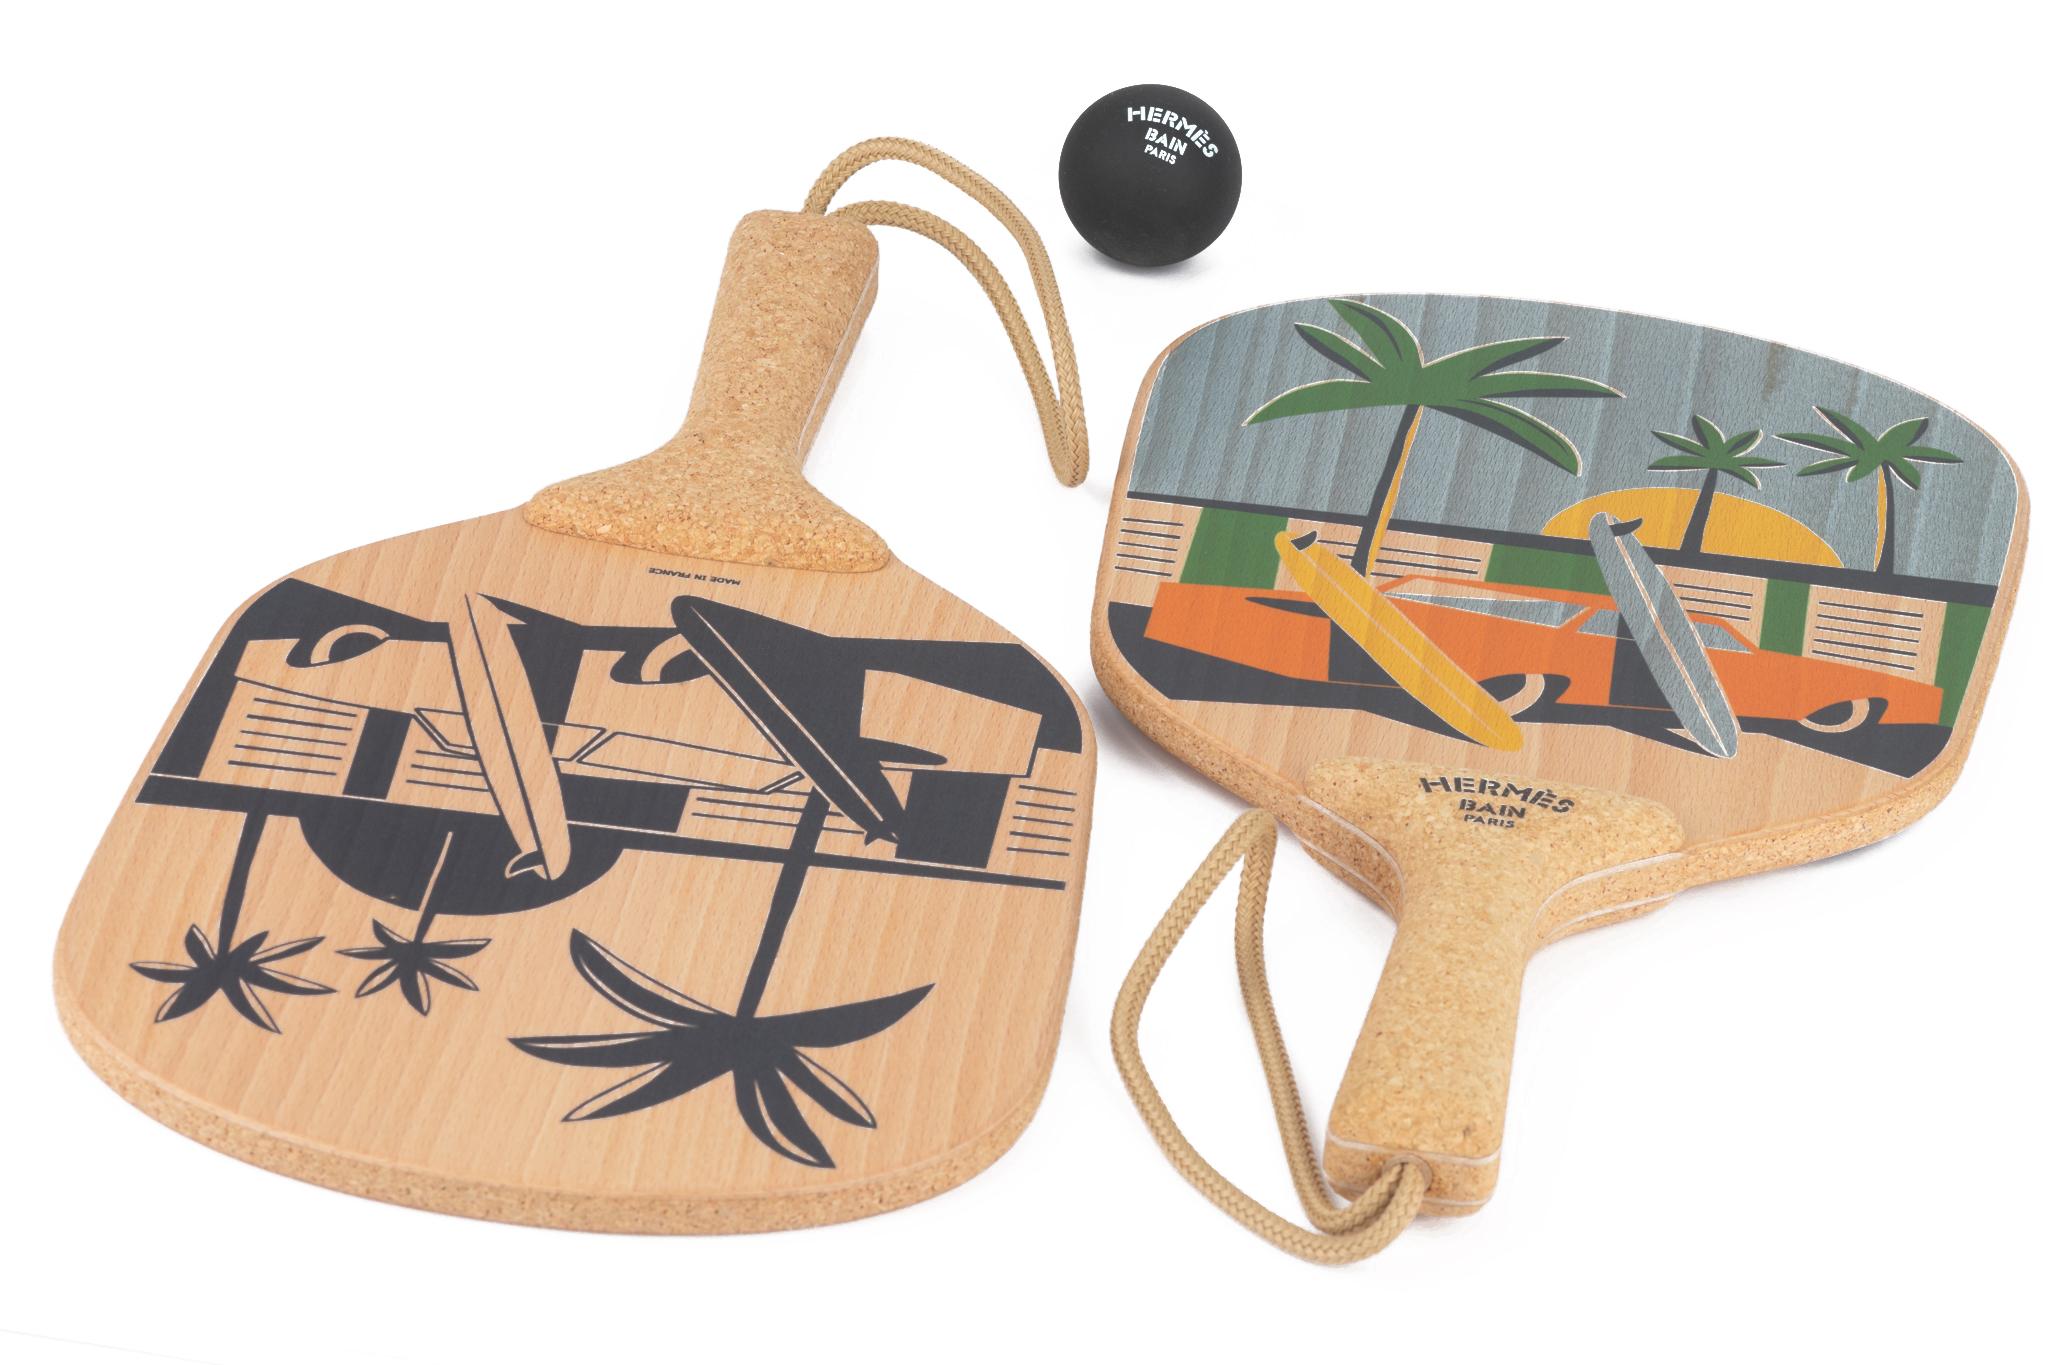 Hermès brand new in box set of 2 beach rackets in printed beechwood and cork, rubber ball, dust cover and box included.